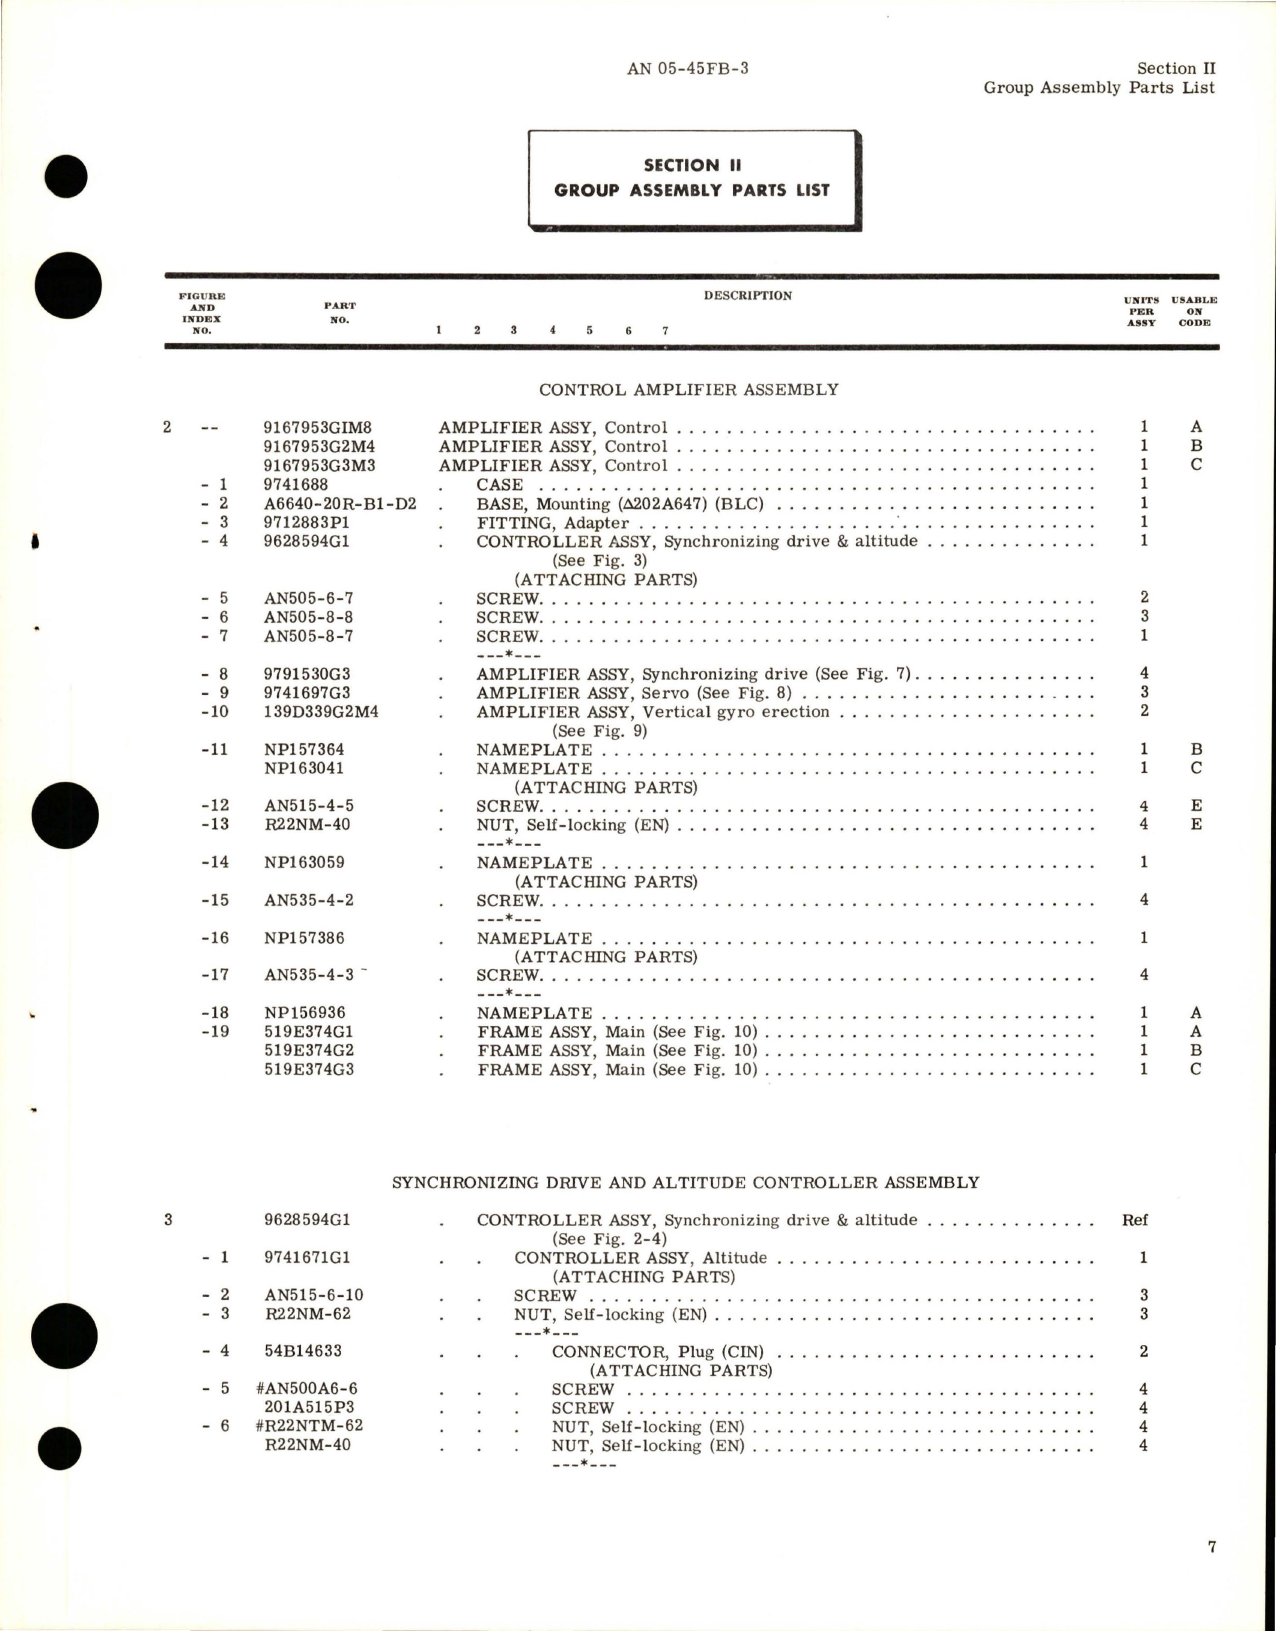 Sample page 9 from AirCorps Library document: Illustrated Parts Breakdown for Control Amplifier and Power Adapter for G-3 Auto Pilot Models 2CJ4B1and 2CJ4B3